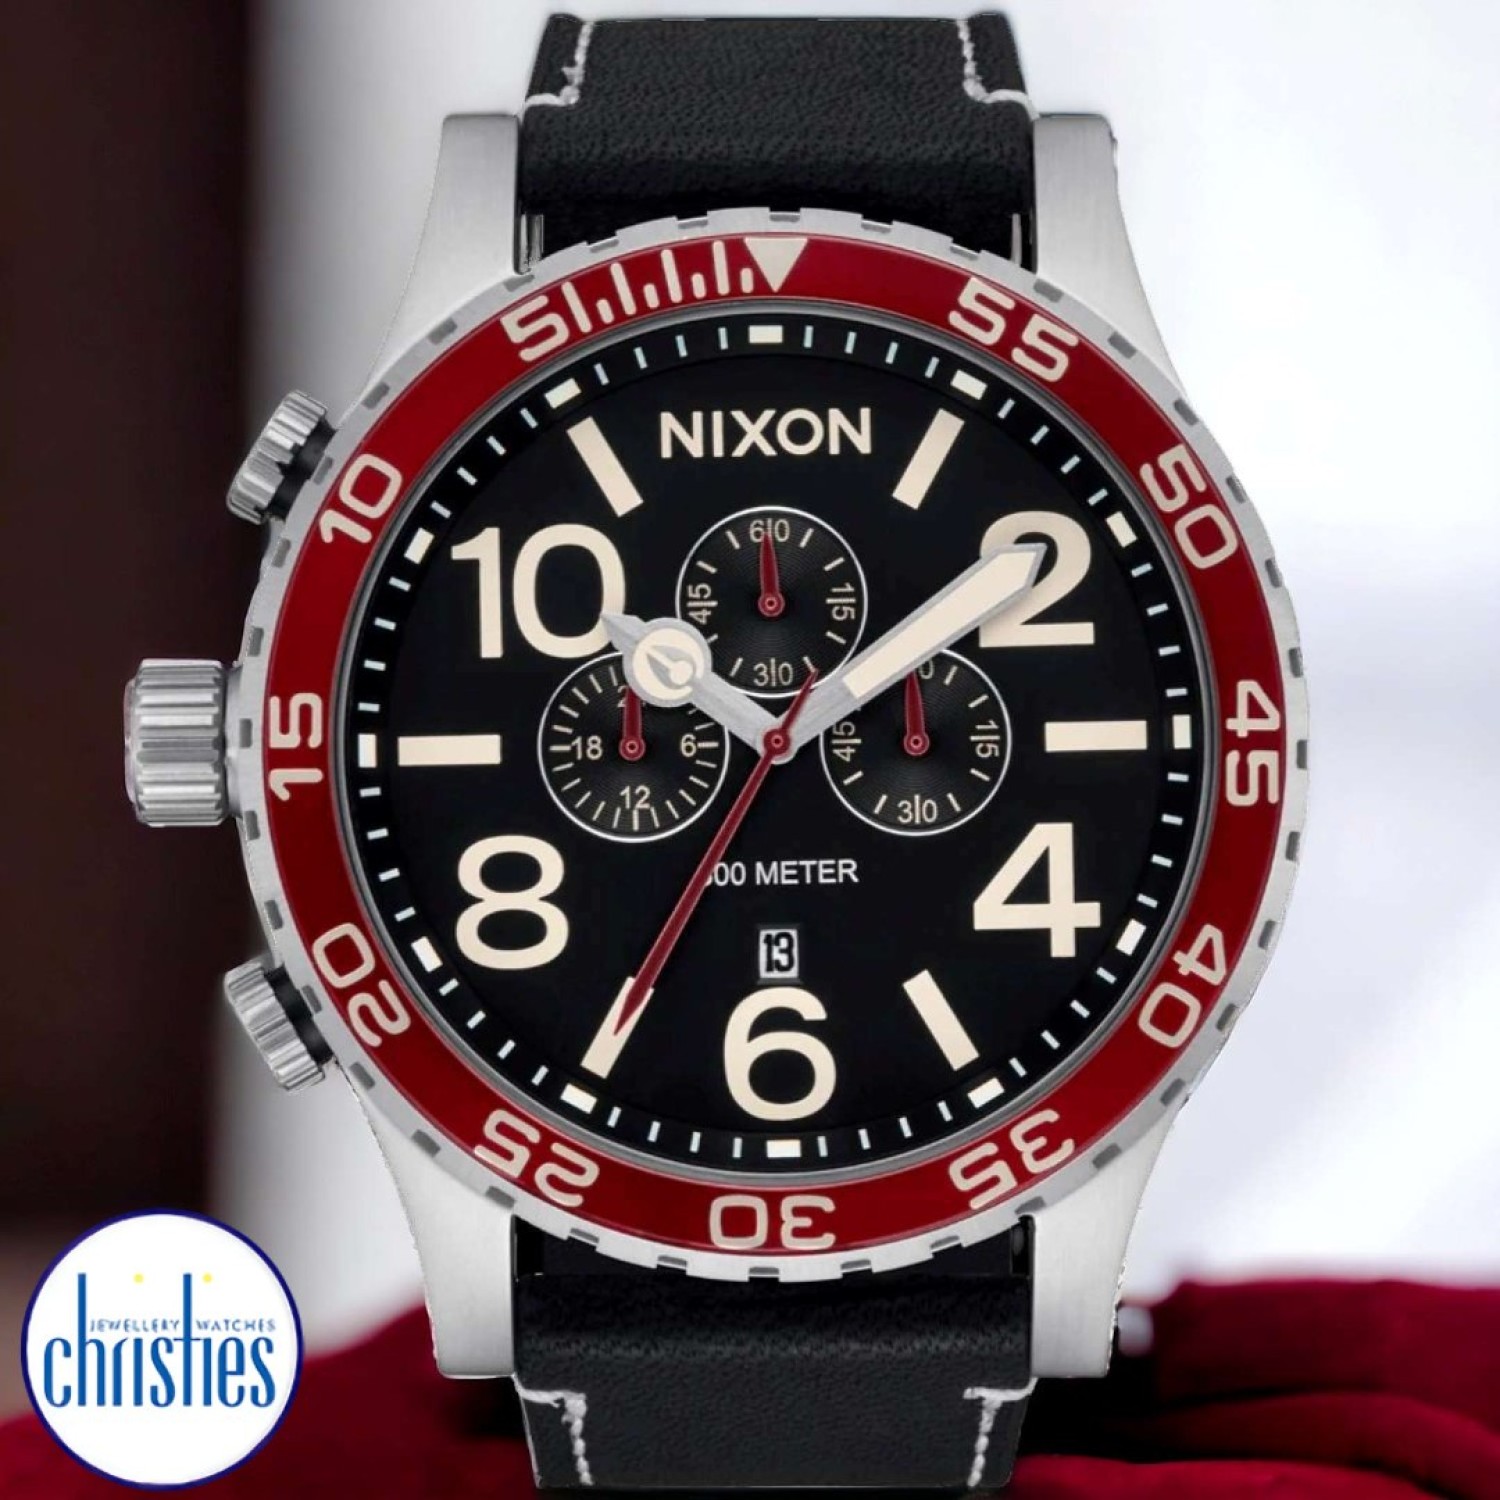 NIXON 51-30 Chrono Leather Watch A1392-5199-00 A13925199 NIXON Watches Auckland |Nixon watches are often chosen as gifts due to their stylish designs and functionality.